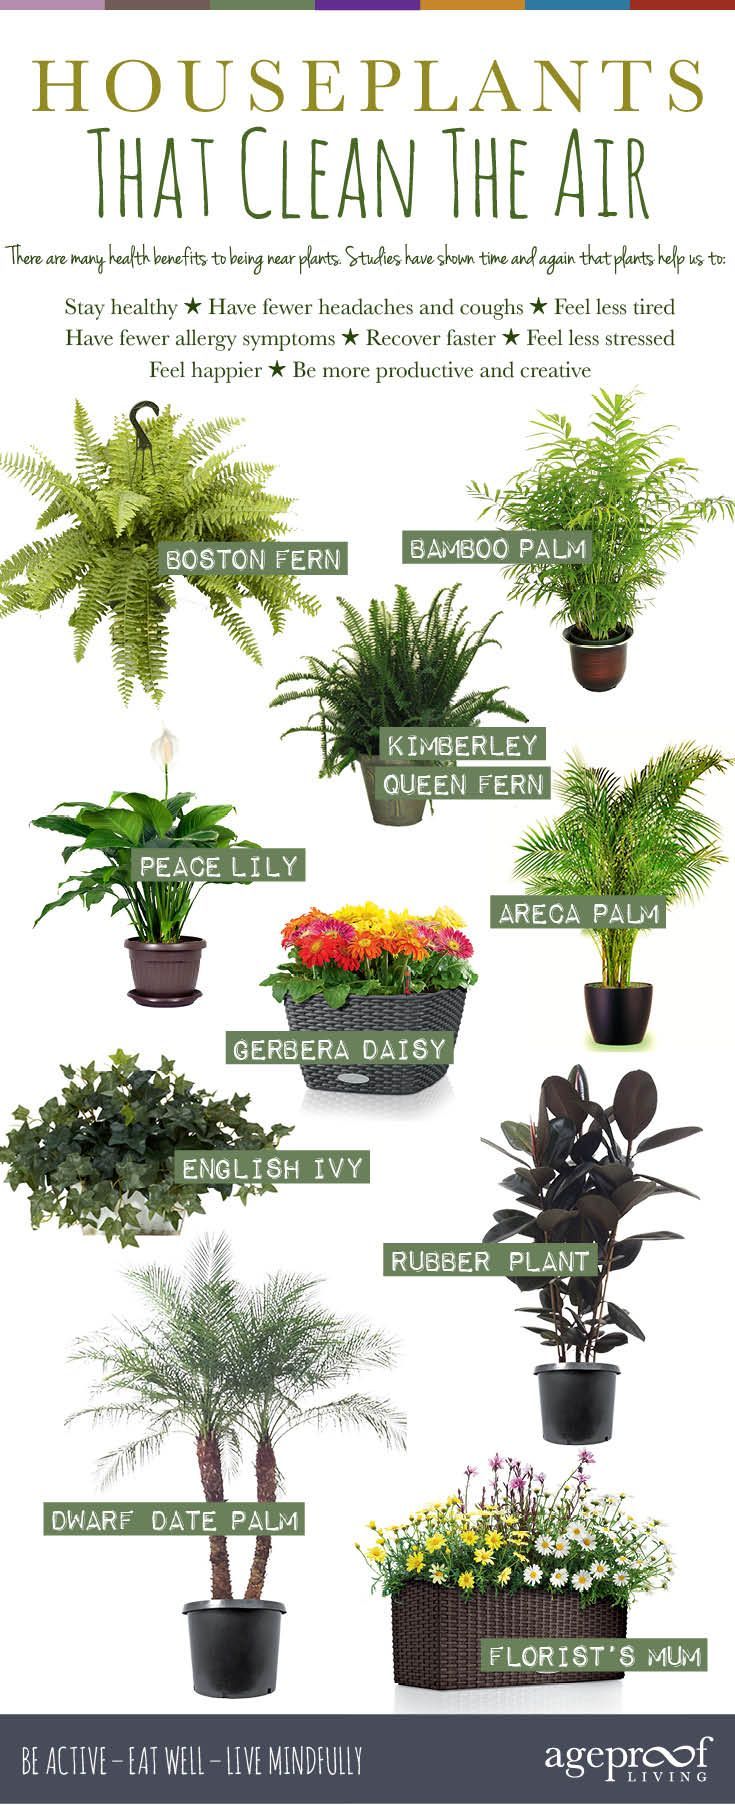 10 Best Houseplants That Clean The Air – We all know that fresh air is vital for our good health, but what if you’re stuck